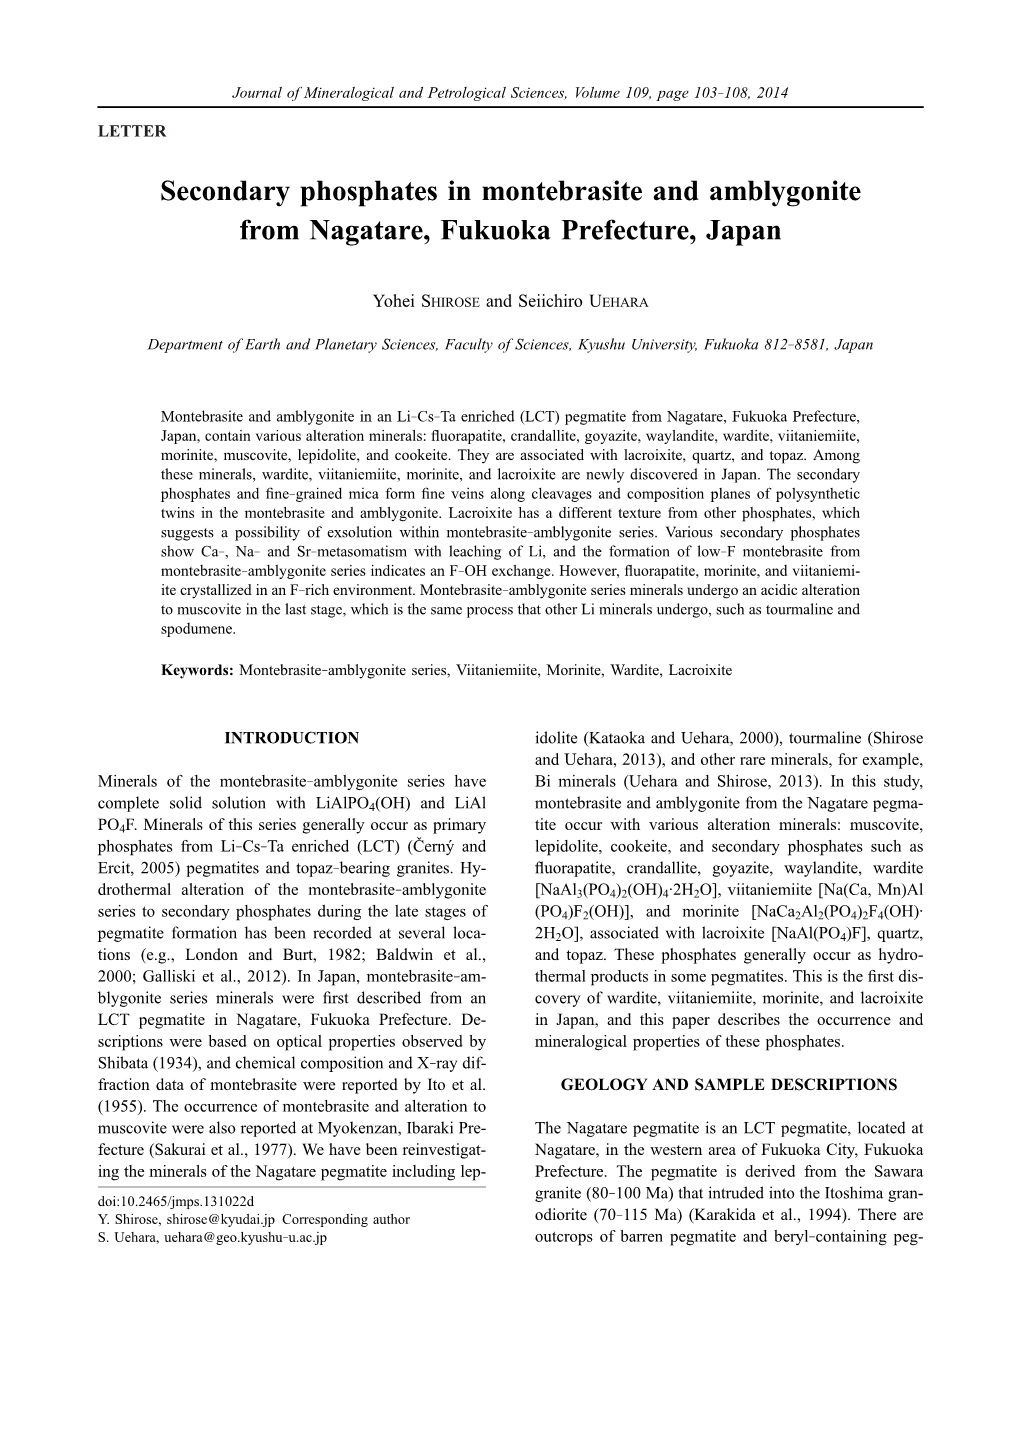 Secondary Phosphates in Montebrasite and Amblygonite from Nagatare, Fukuoka Prefecture, Japan